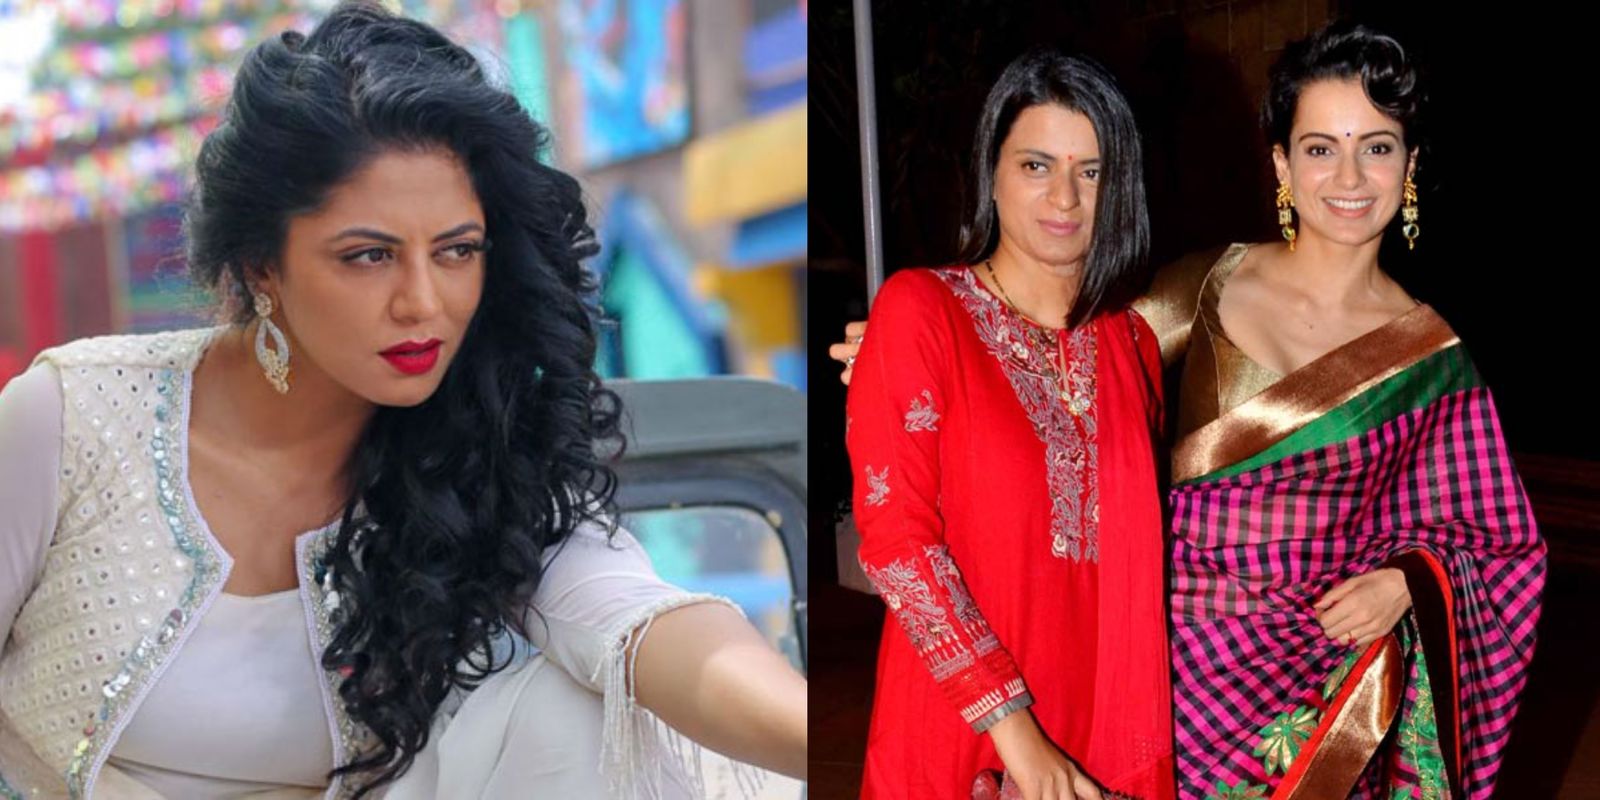 Is Kavita Kaushik Hinting At Kangana Ranaut And Sister Rangoli With Her 'Aggressive Quarrelsome Women' Comment? Find Out